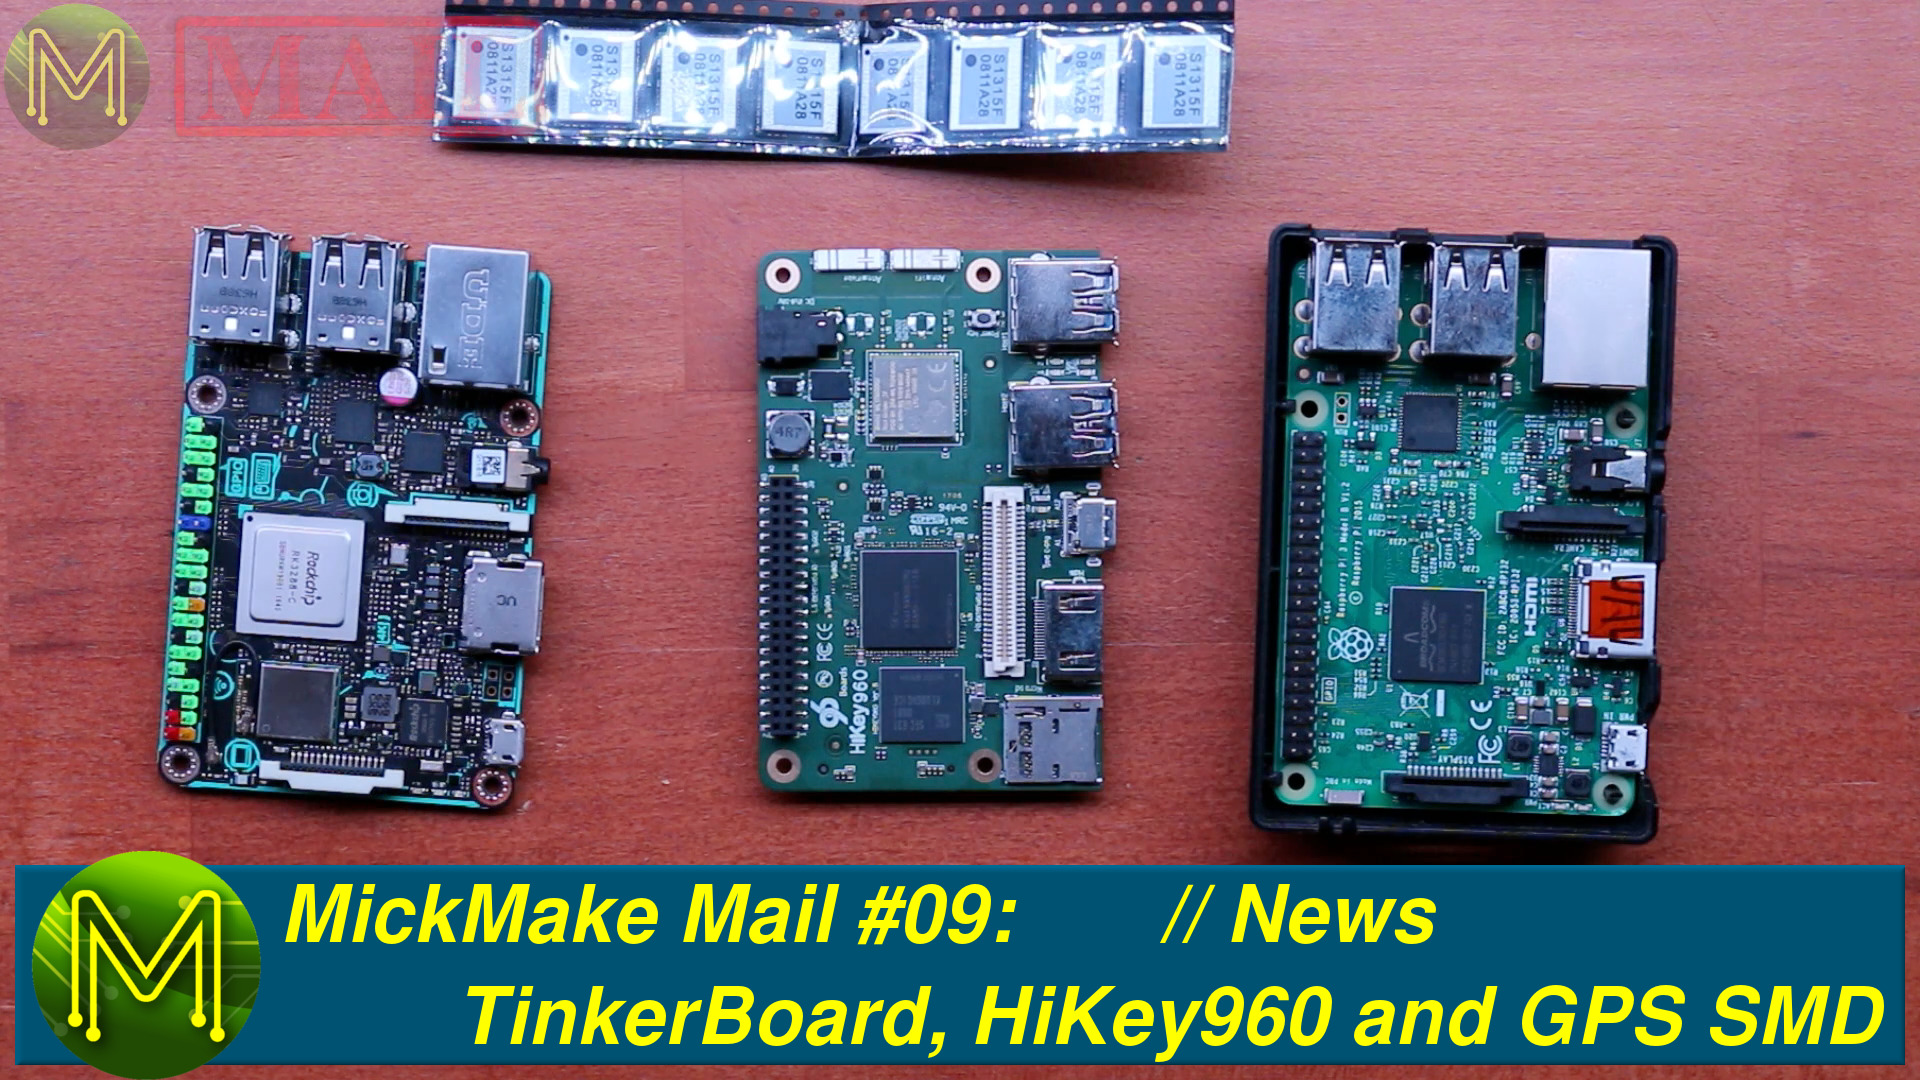 MickMake Mail #09: TinkerBoard, HiKey960 and GPS SMD // News